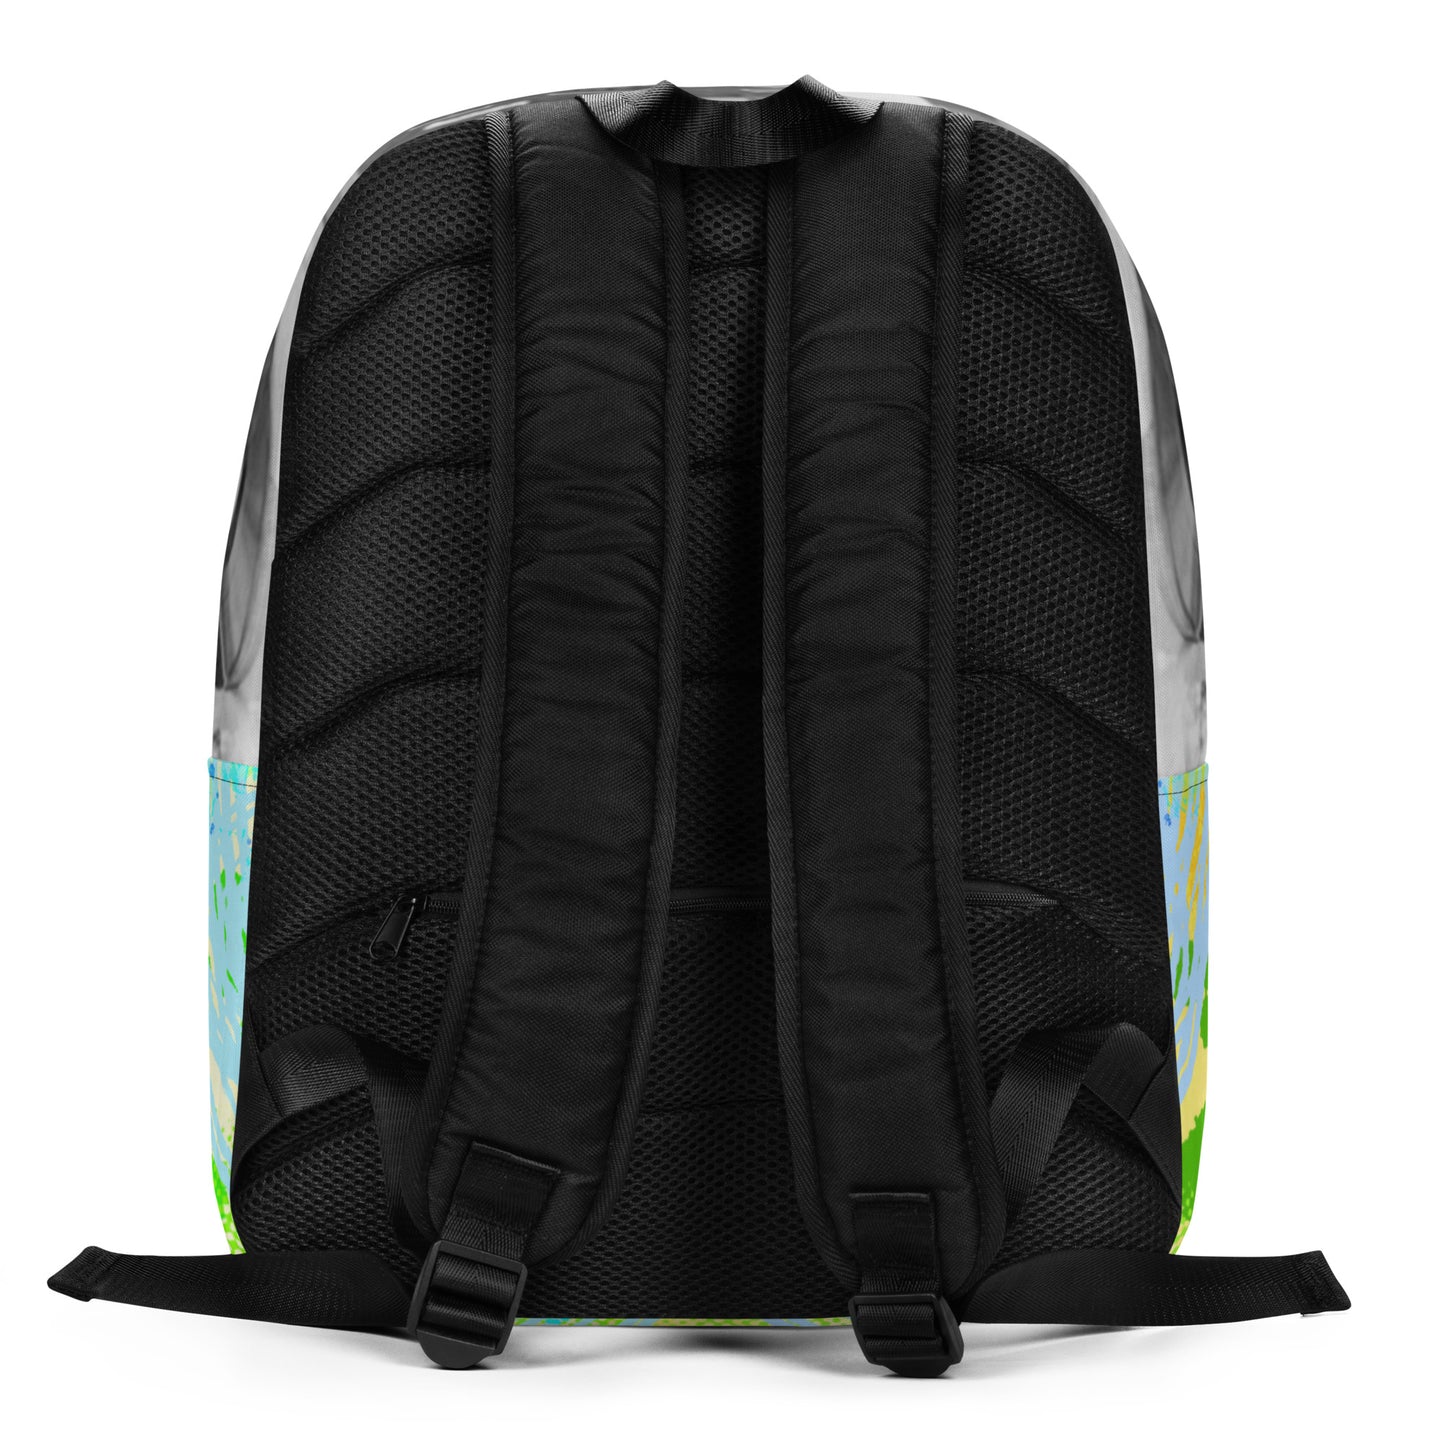 "The Shaman" Backpack